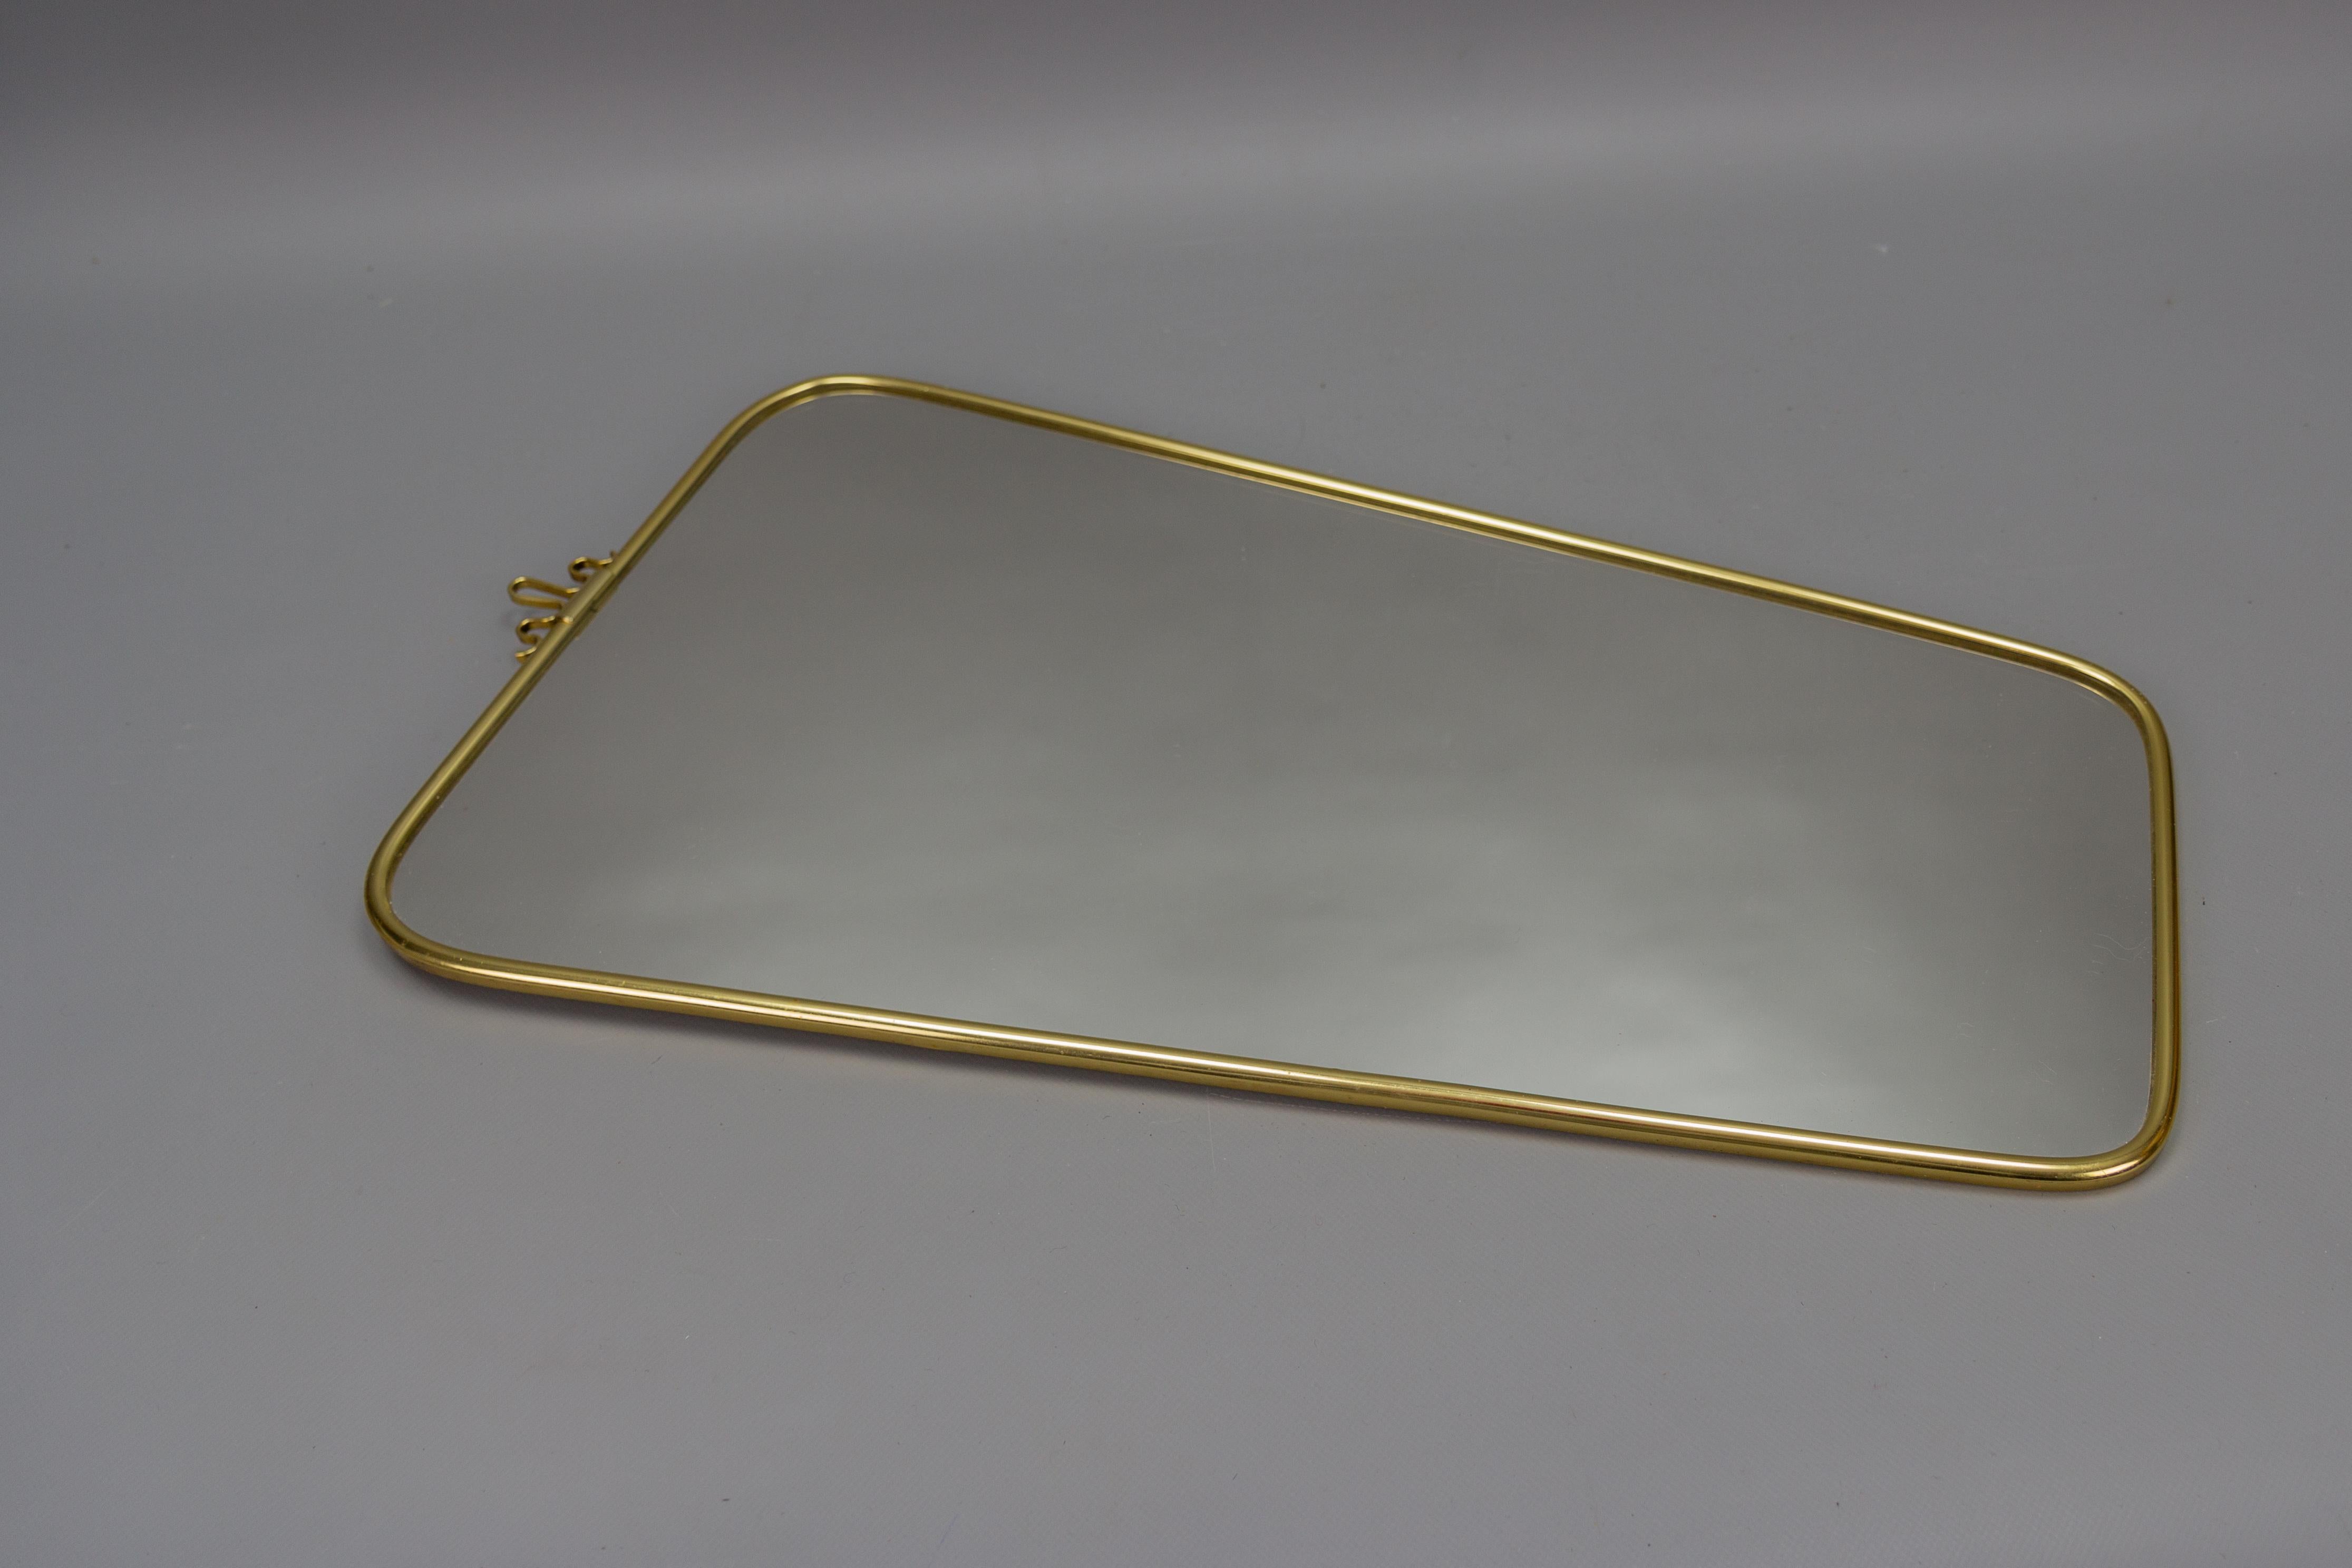 German Mid-Century Modern Brass Frame Wall Mirror by Lenzgold, 1960s For Sale 1